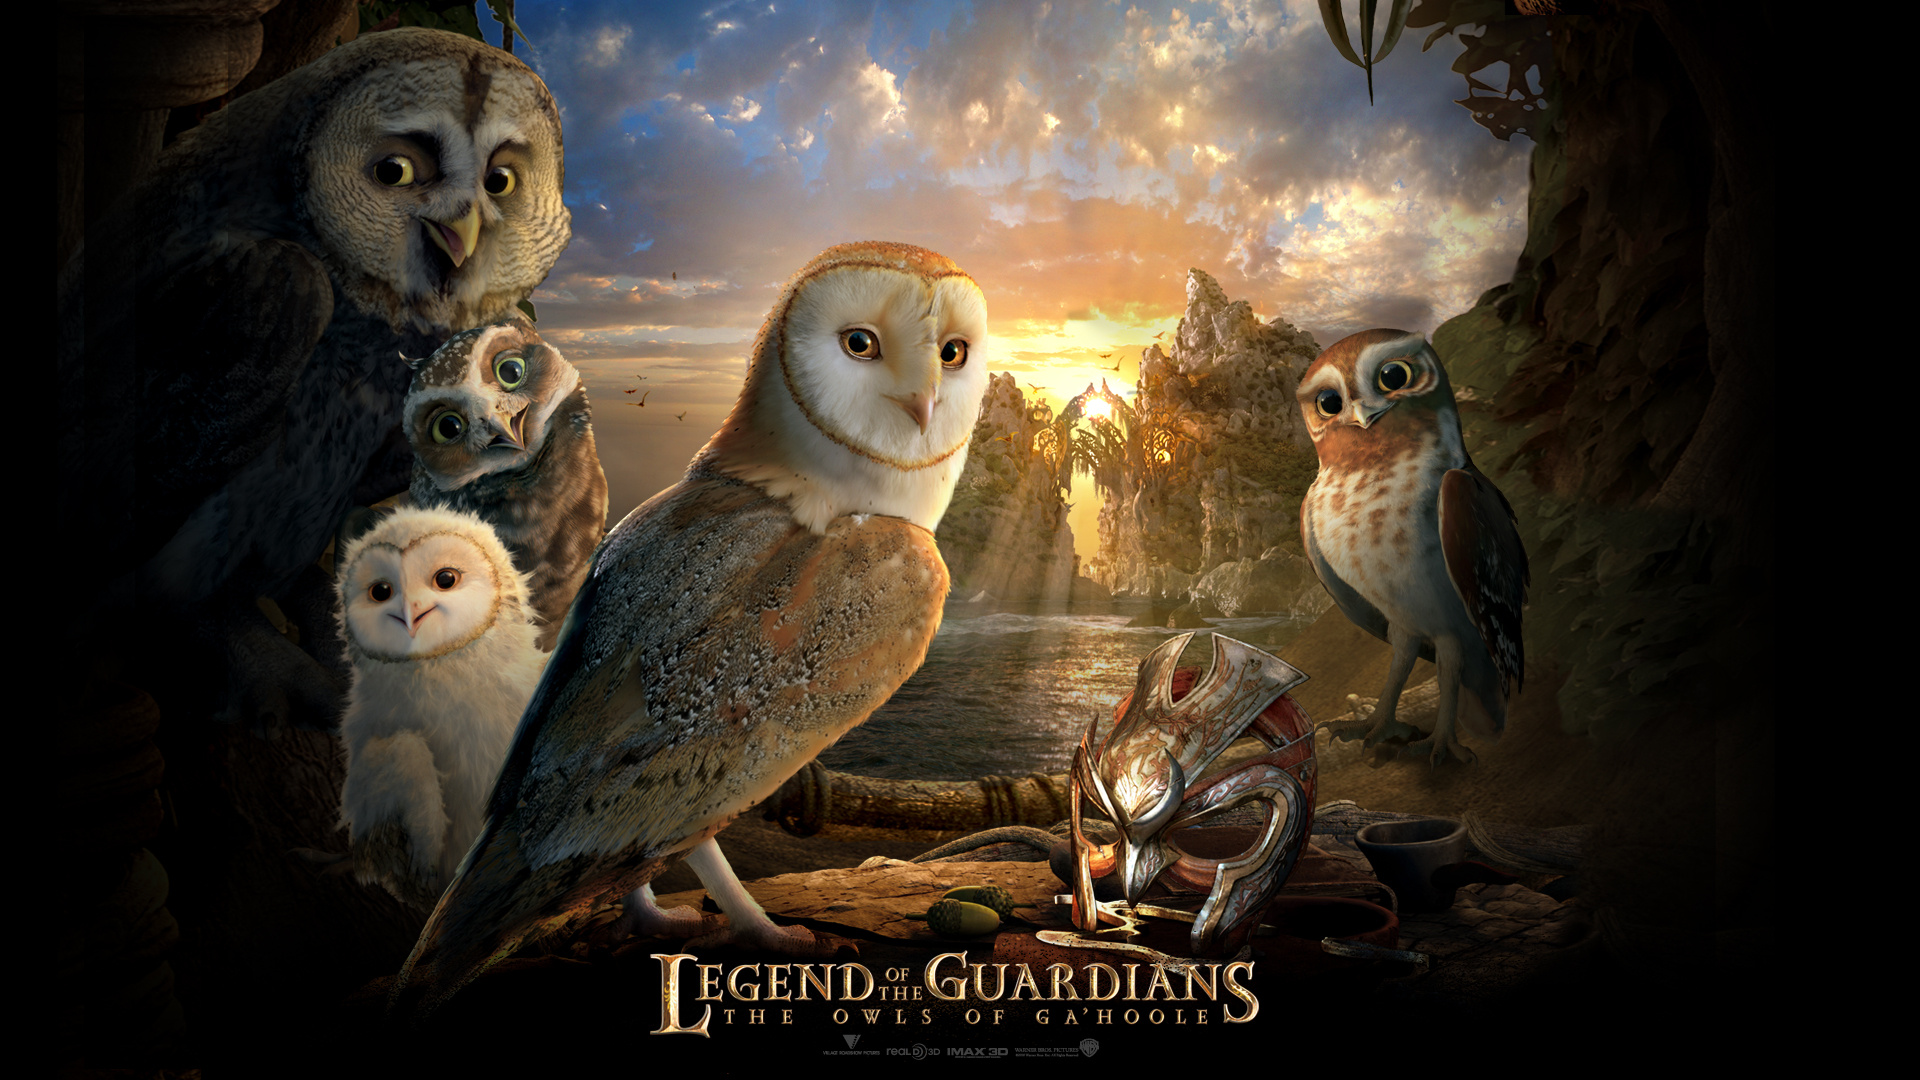 Legend of the Guardians: The Owls of Ga'Hoole, Eye-catching wallpapers, Epic adventure, Majestic owls, 1920x1080 Full HD Desktop